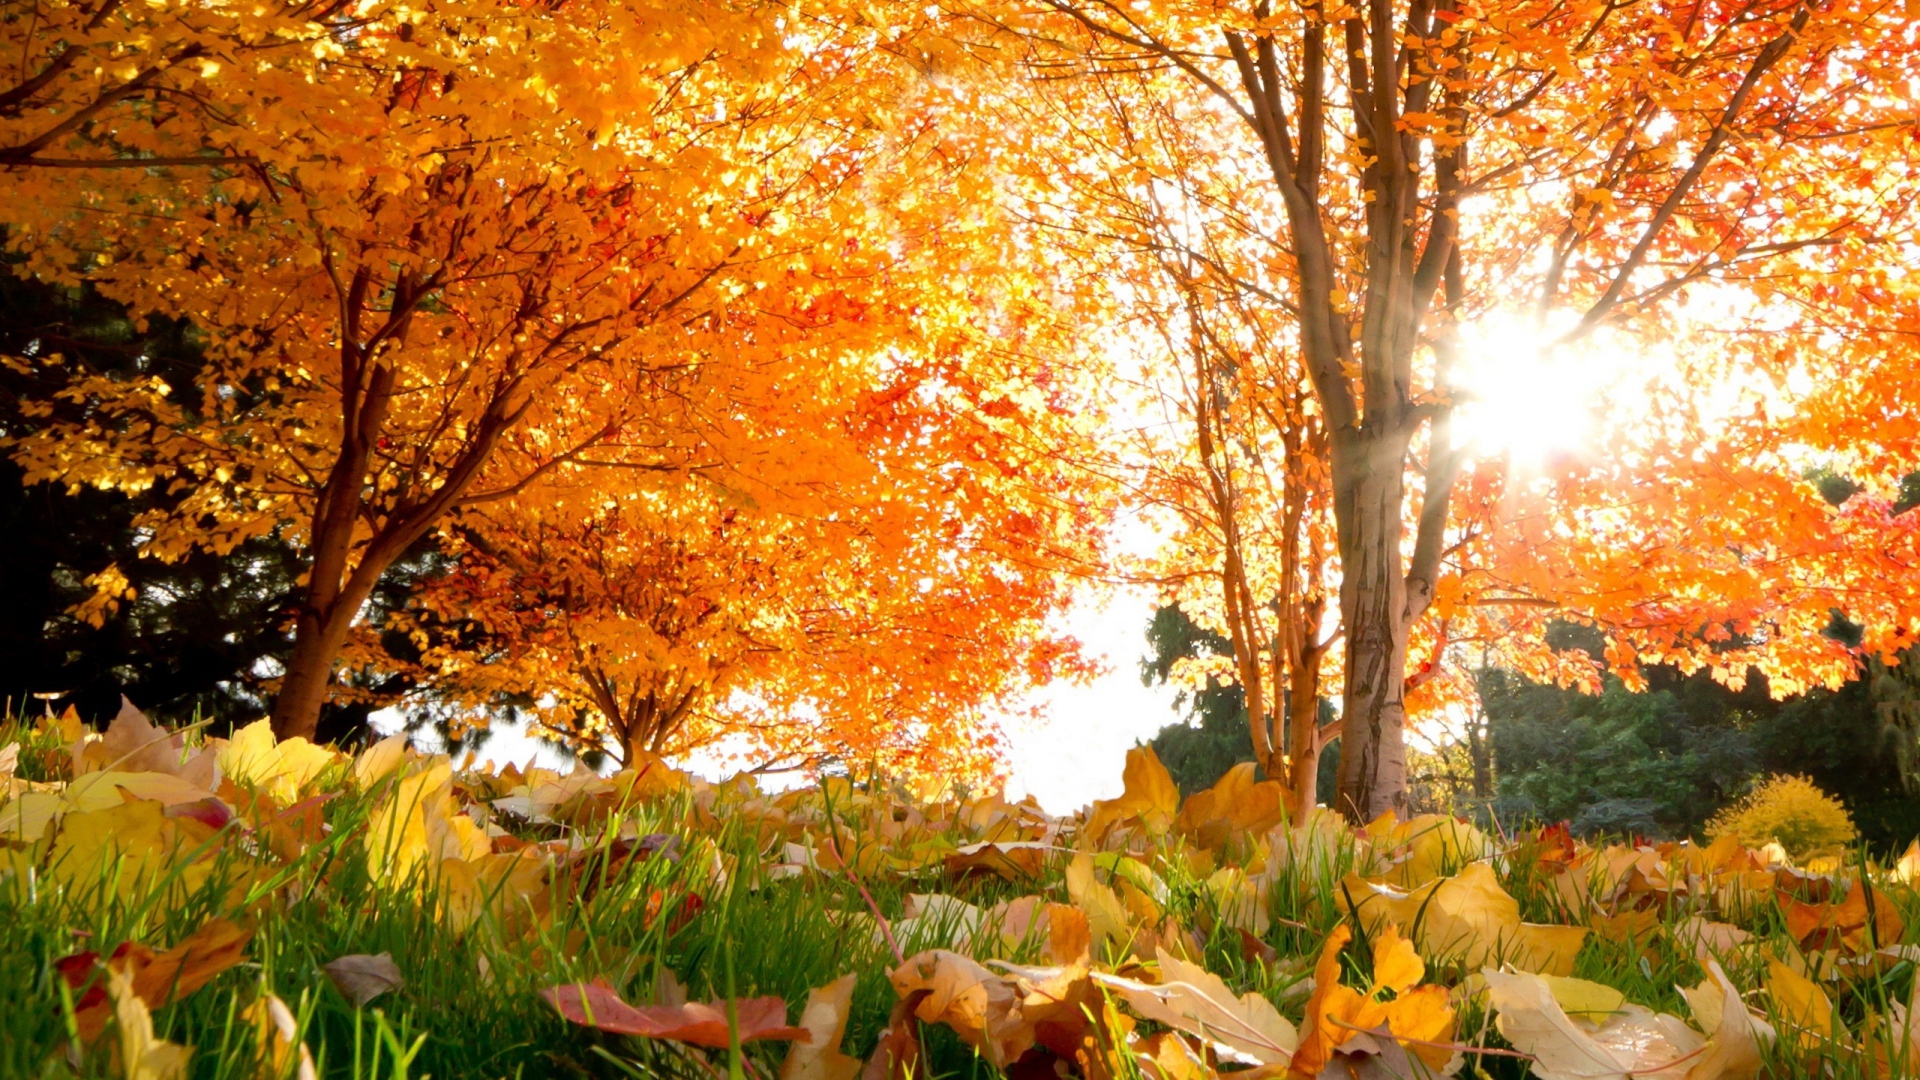 Download Wallpaper 1920x1080 fall, trees, leaves Full HD 1080p HD Background